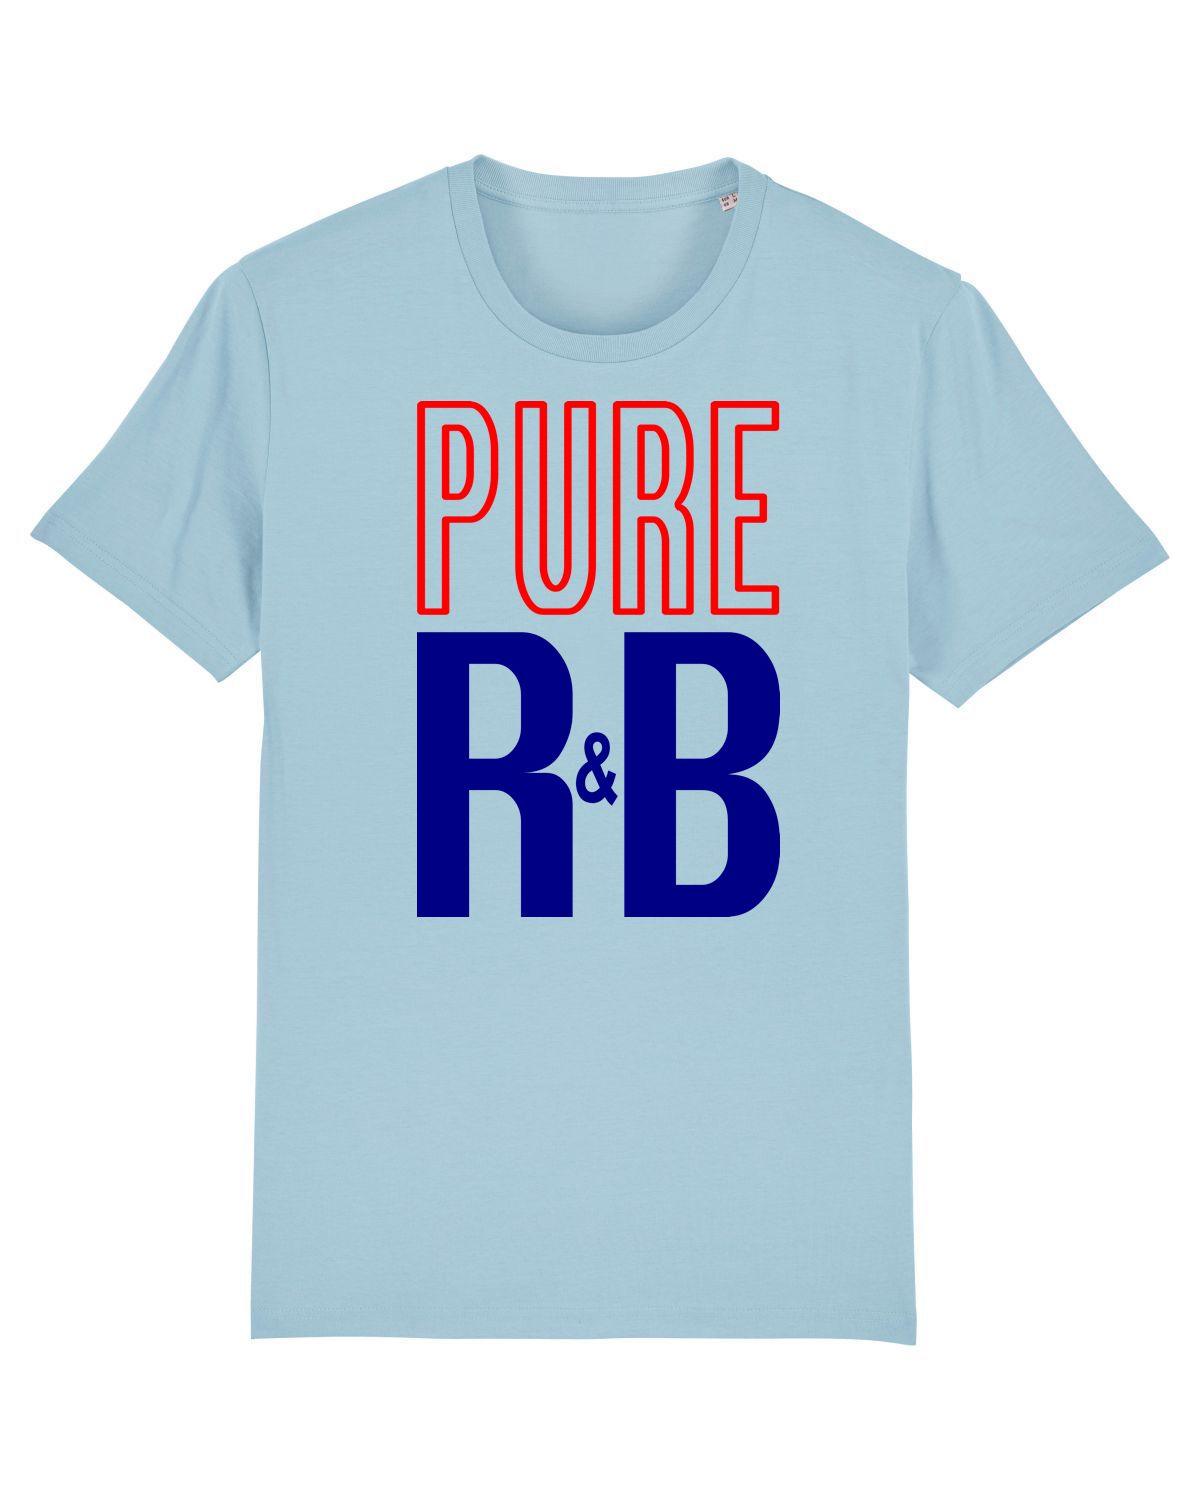 PURE R&B - Premium Organic T-Shirt Inspided By 80s Mods Culture (3 Colours) - Suit Yourself Music